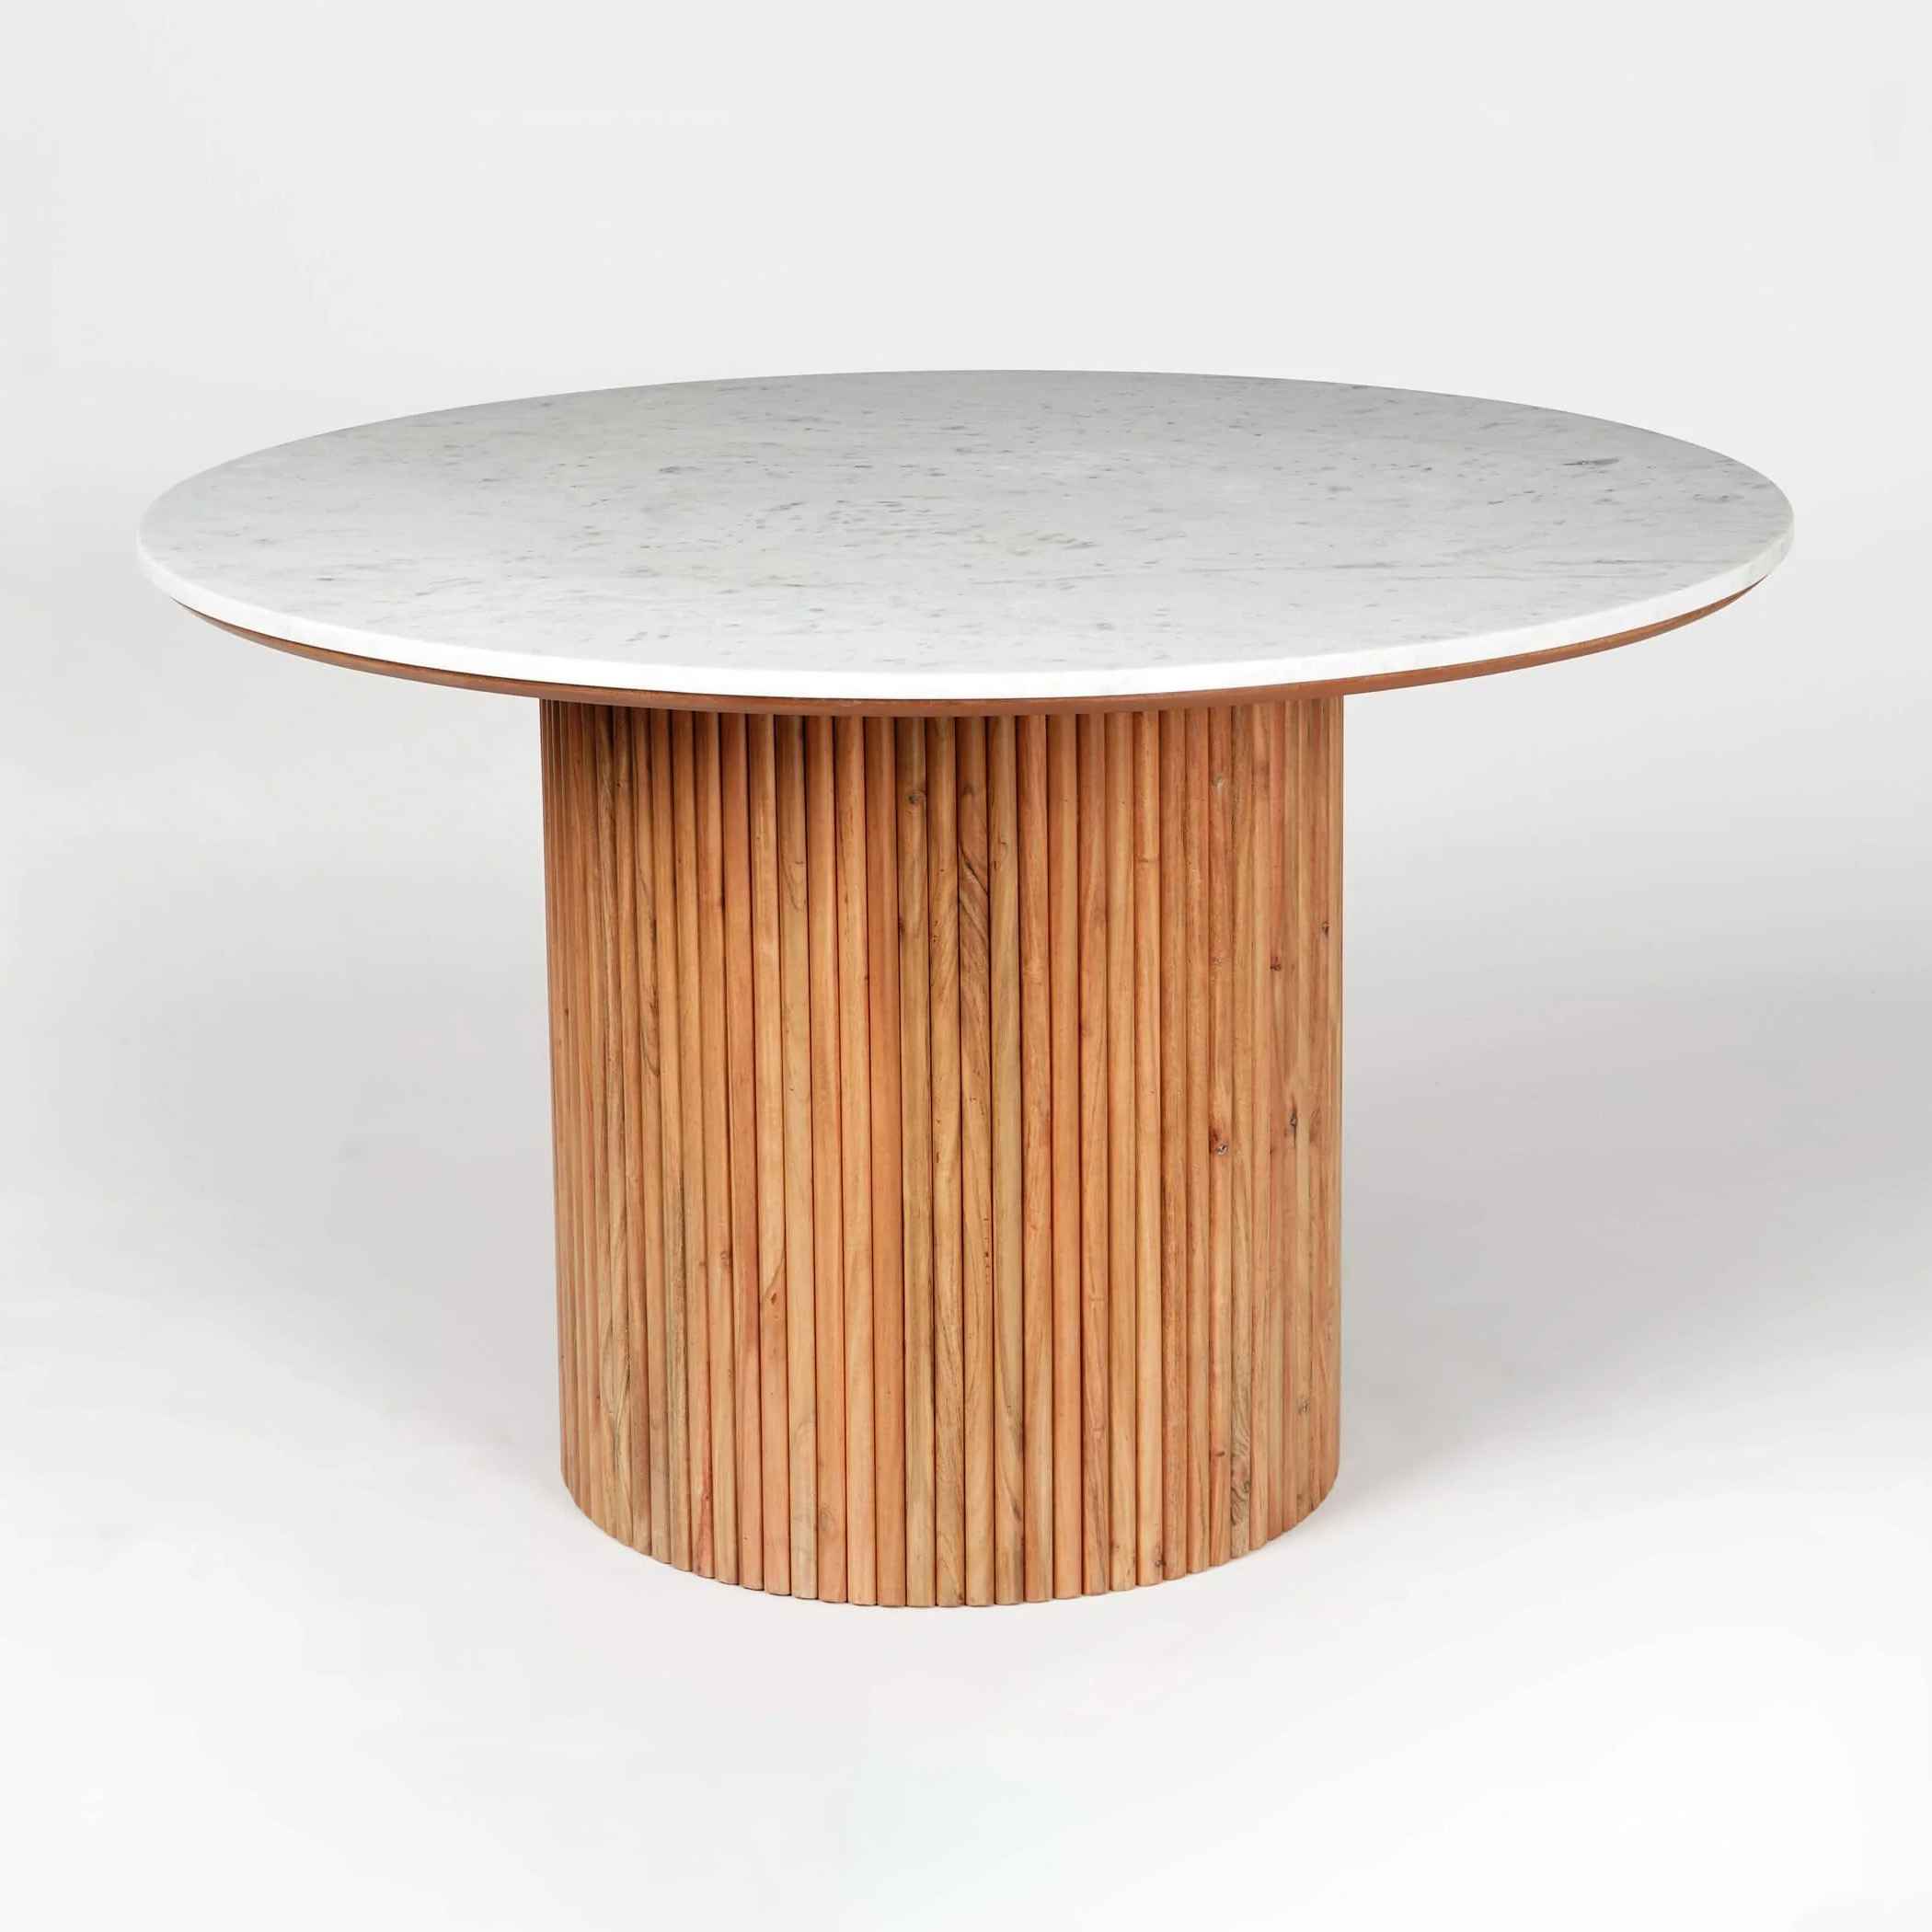 Mondriang Dining Table